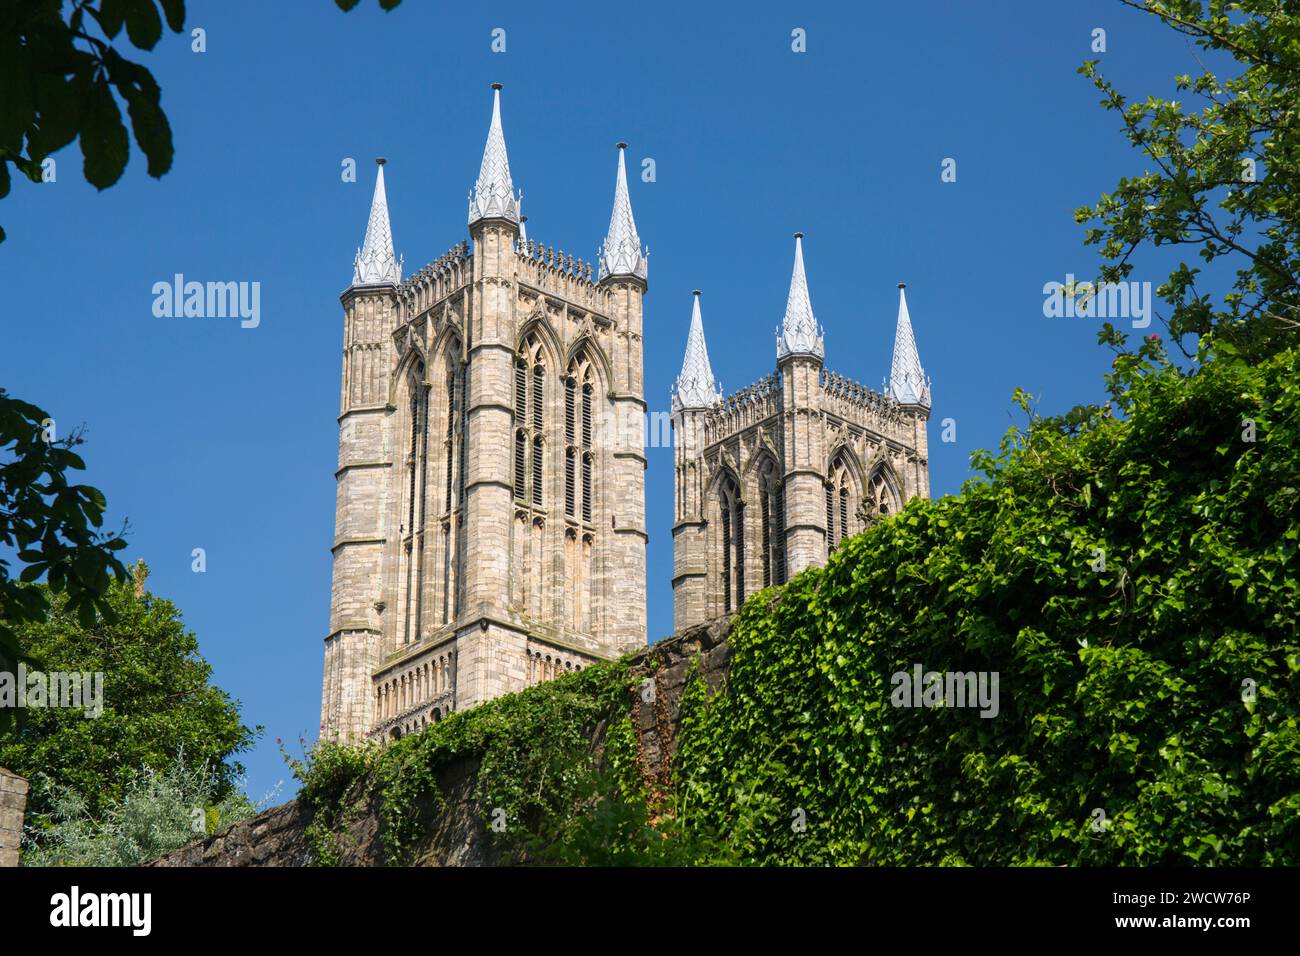 Lincoln, Lincolnshire, England. Low angle view from gardens of the Bishop's Palace to the twin west towers of Lincoln Cathedral. Stock Photo